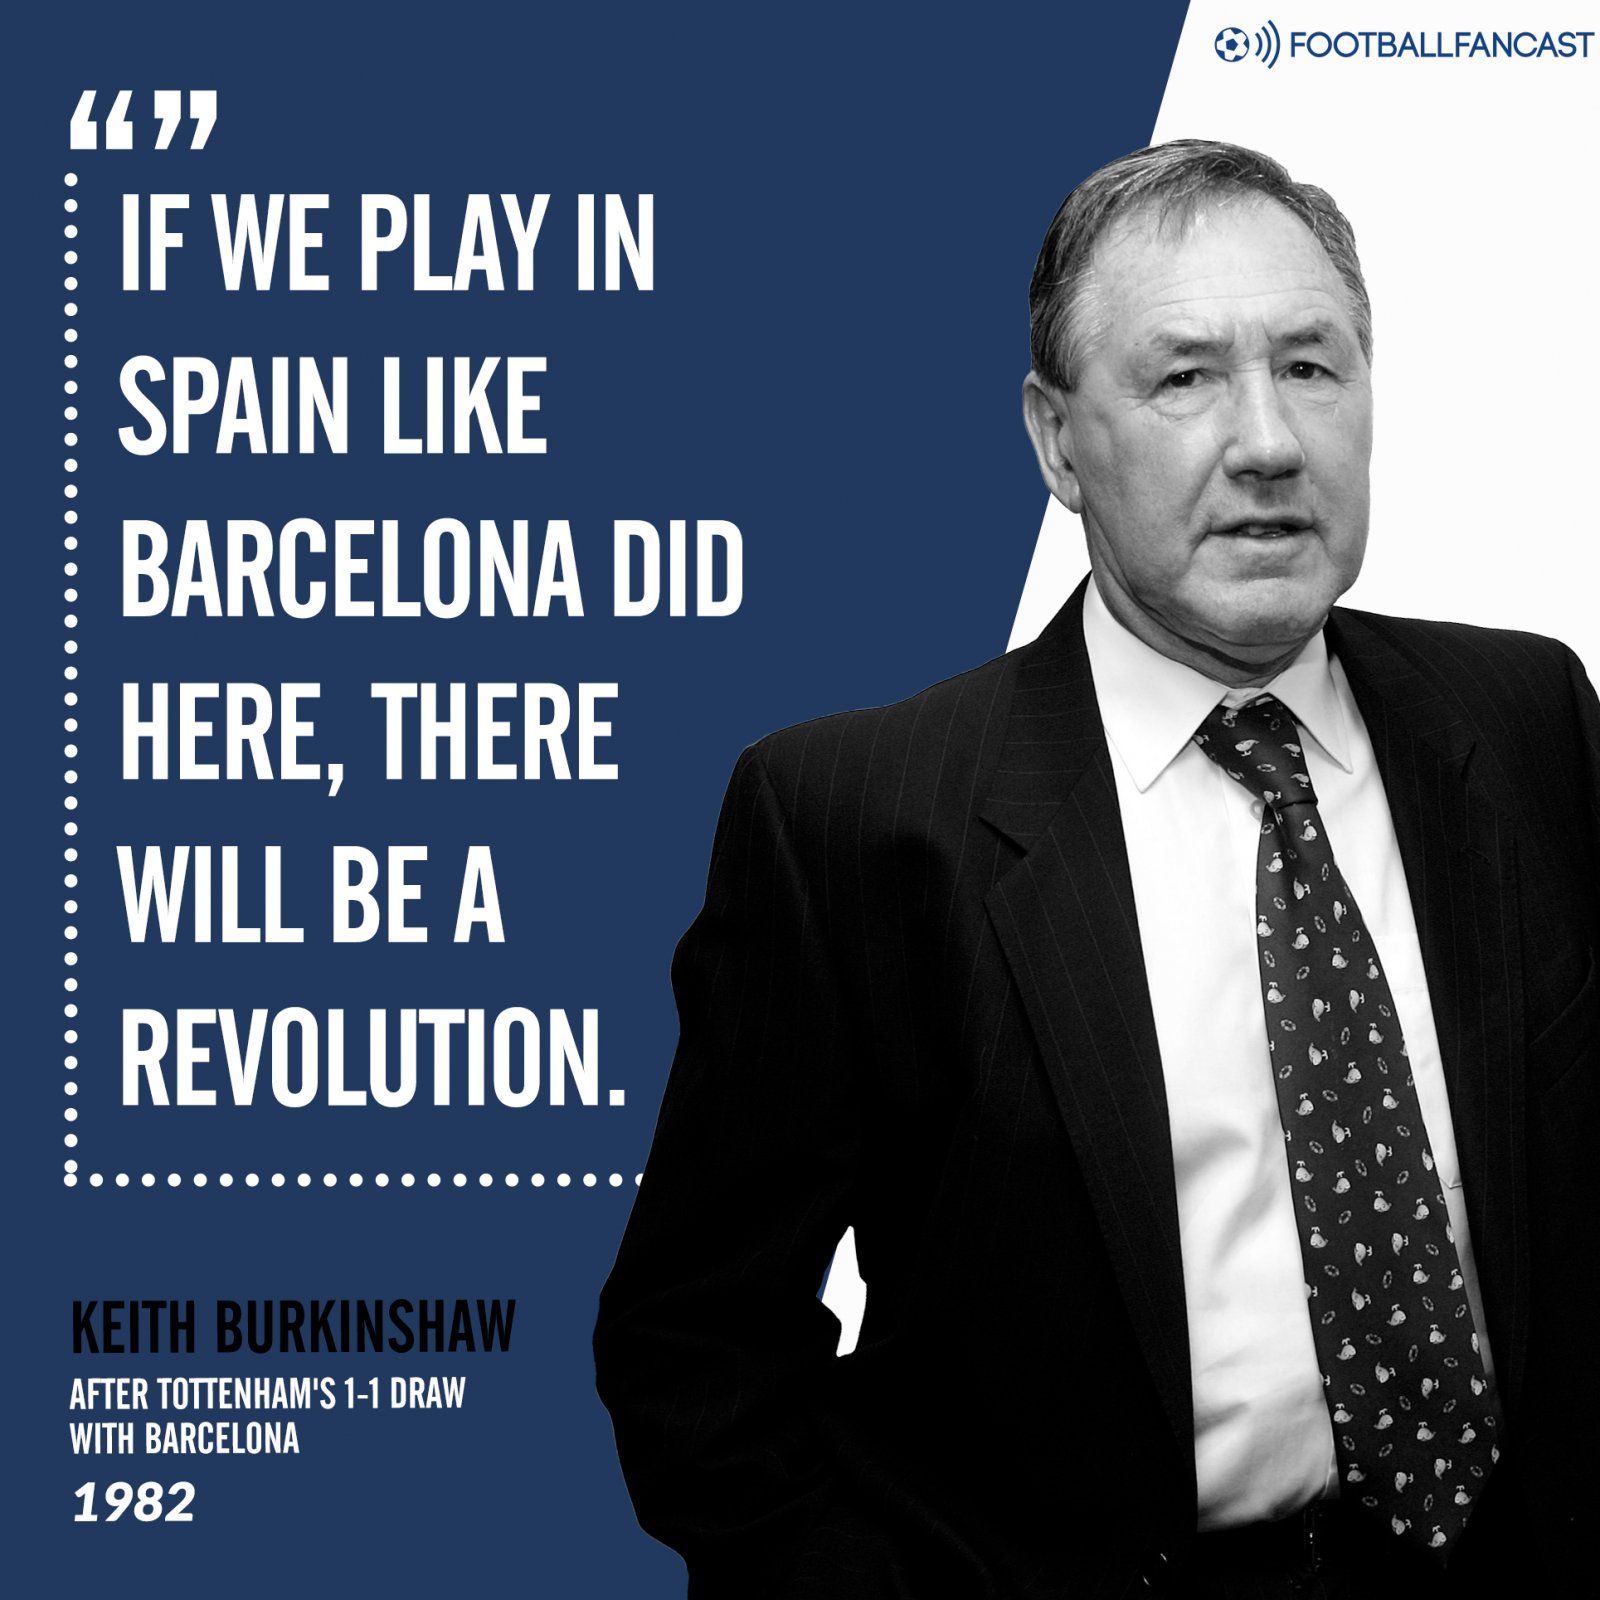 Keith Burkinshaw's comments on Barcelona's performance versus Spurs